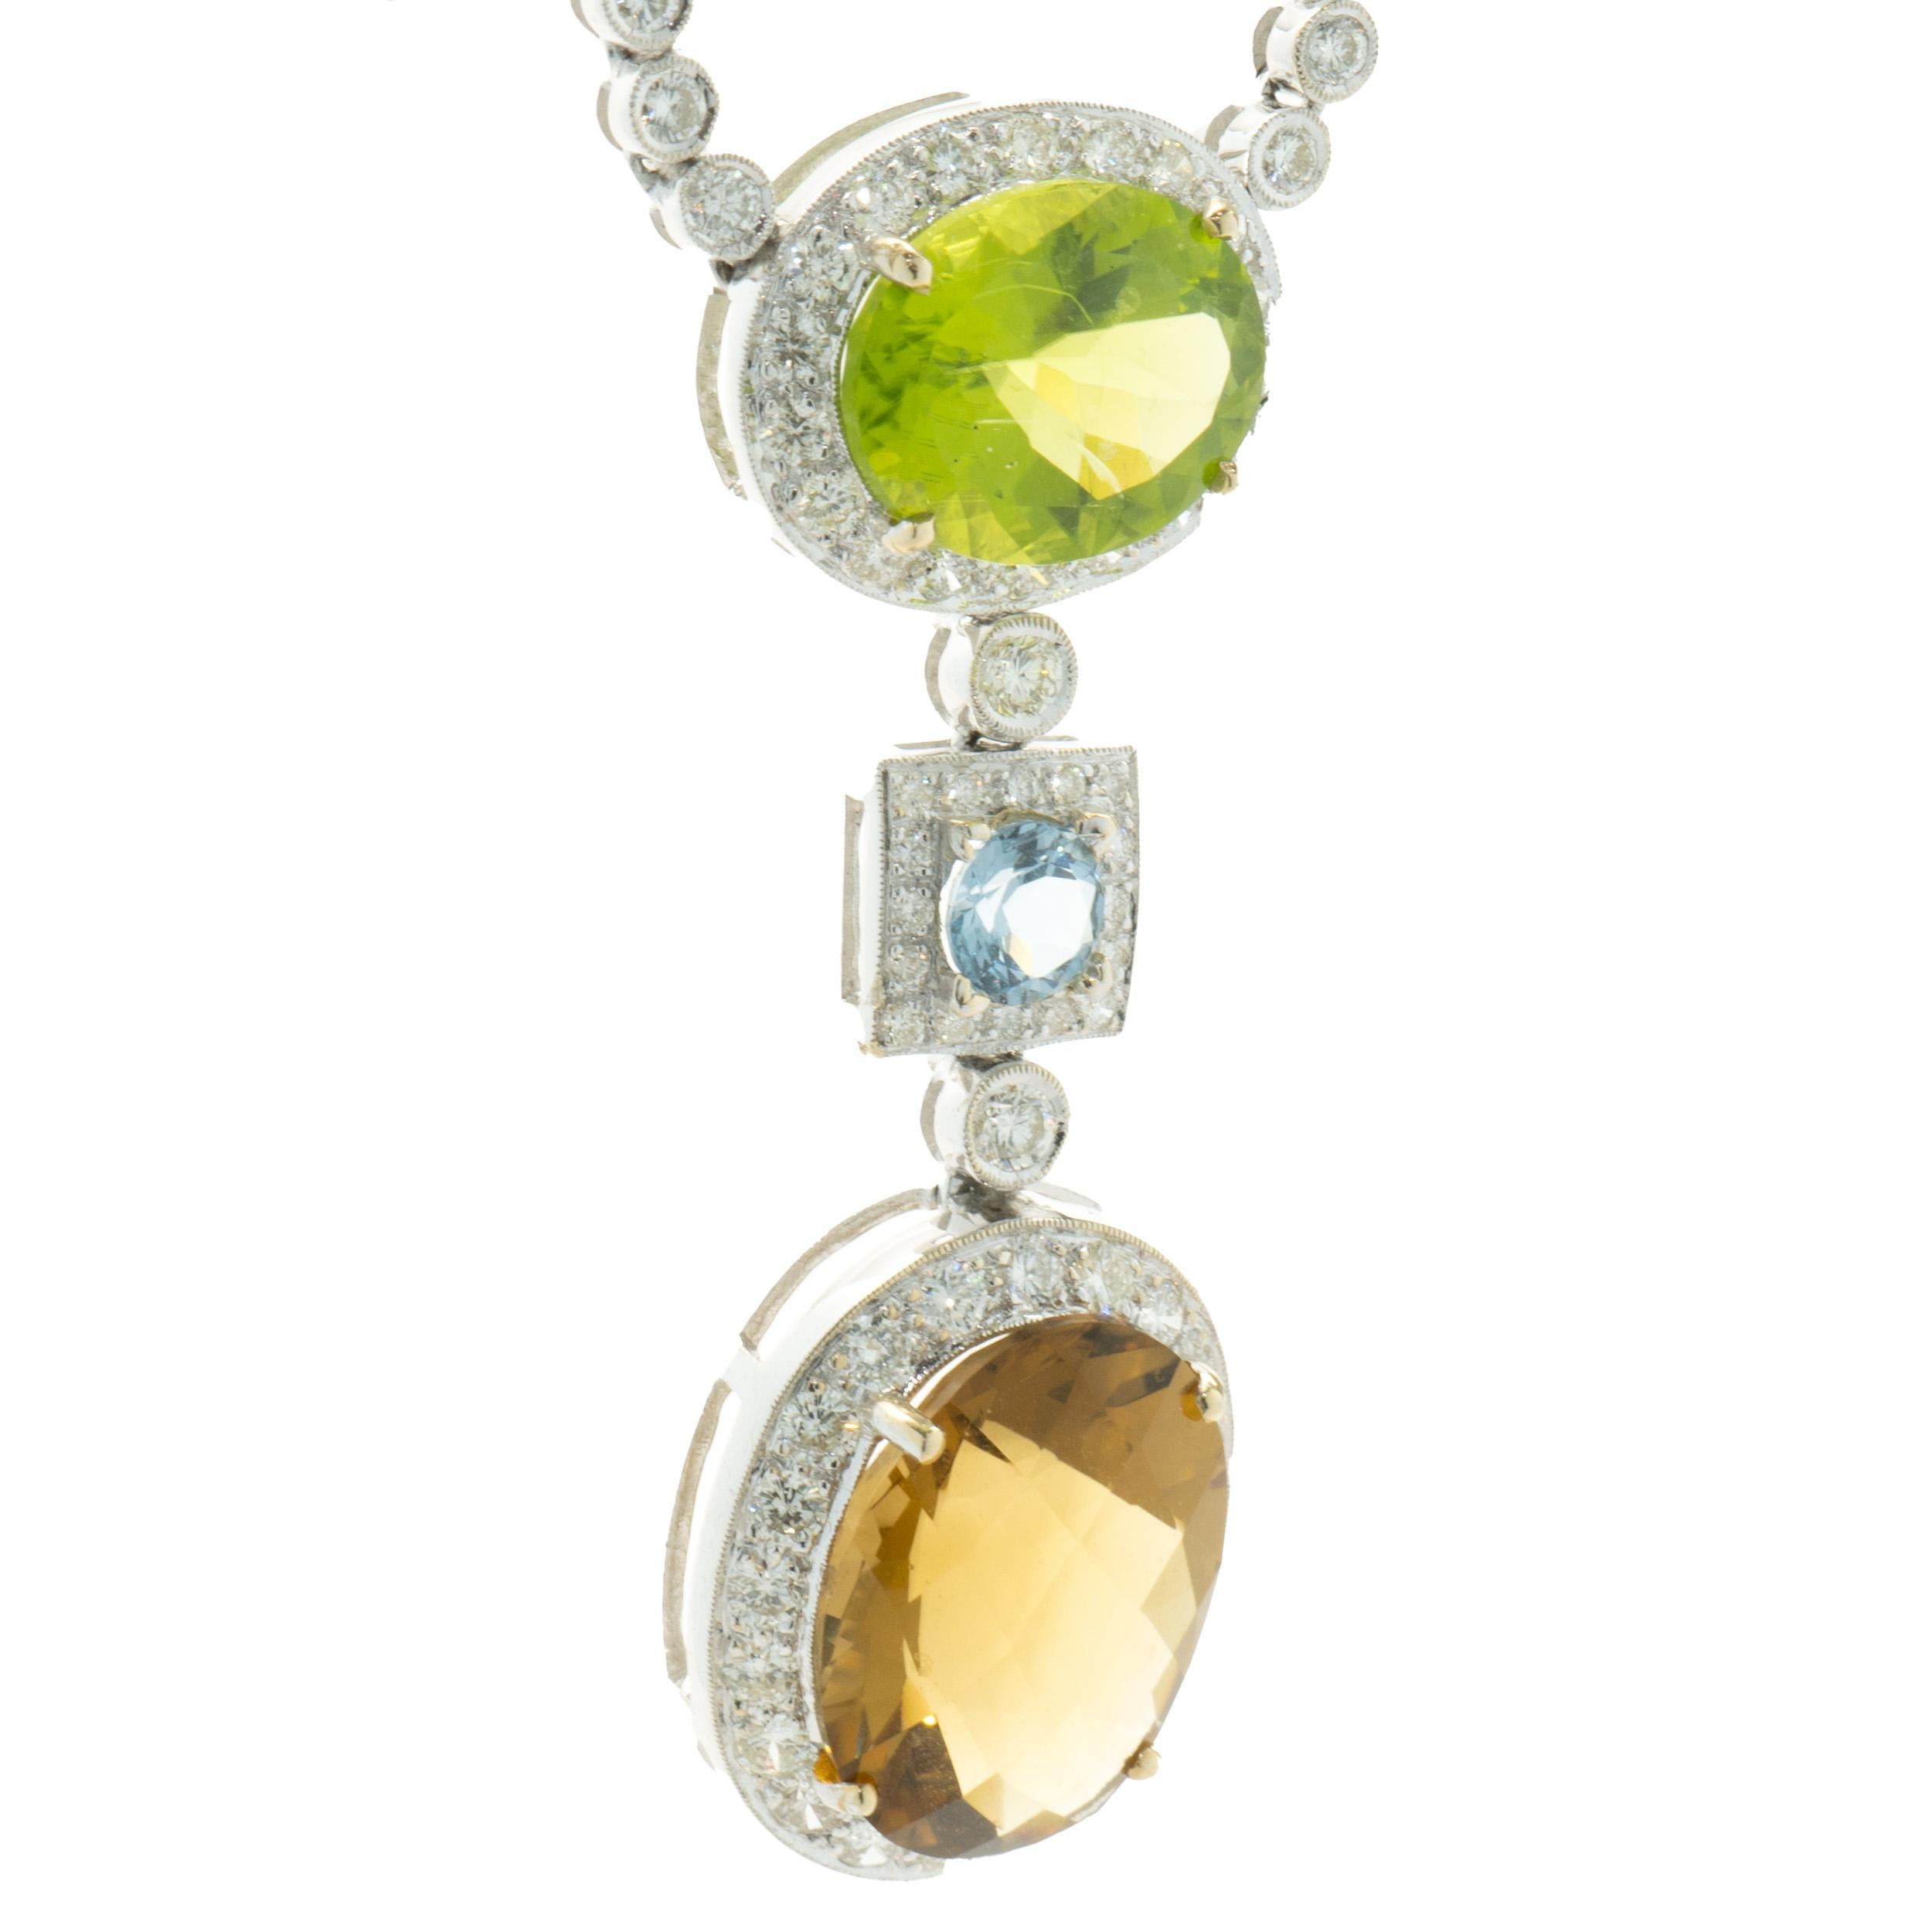 Designer: custom
Material: 18K white gold
Diamond: round brilliant cut = 12.46cttw
Color: G
Clarity: VS2
Peridot: oval cut = 15.66cttw
Citrine: oval cut = 18.79cttw
Dimensions: necklace measures 18-inches in length
Weight: 50.04 grams